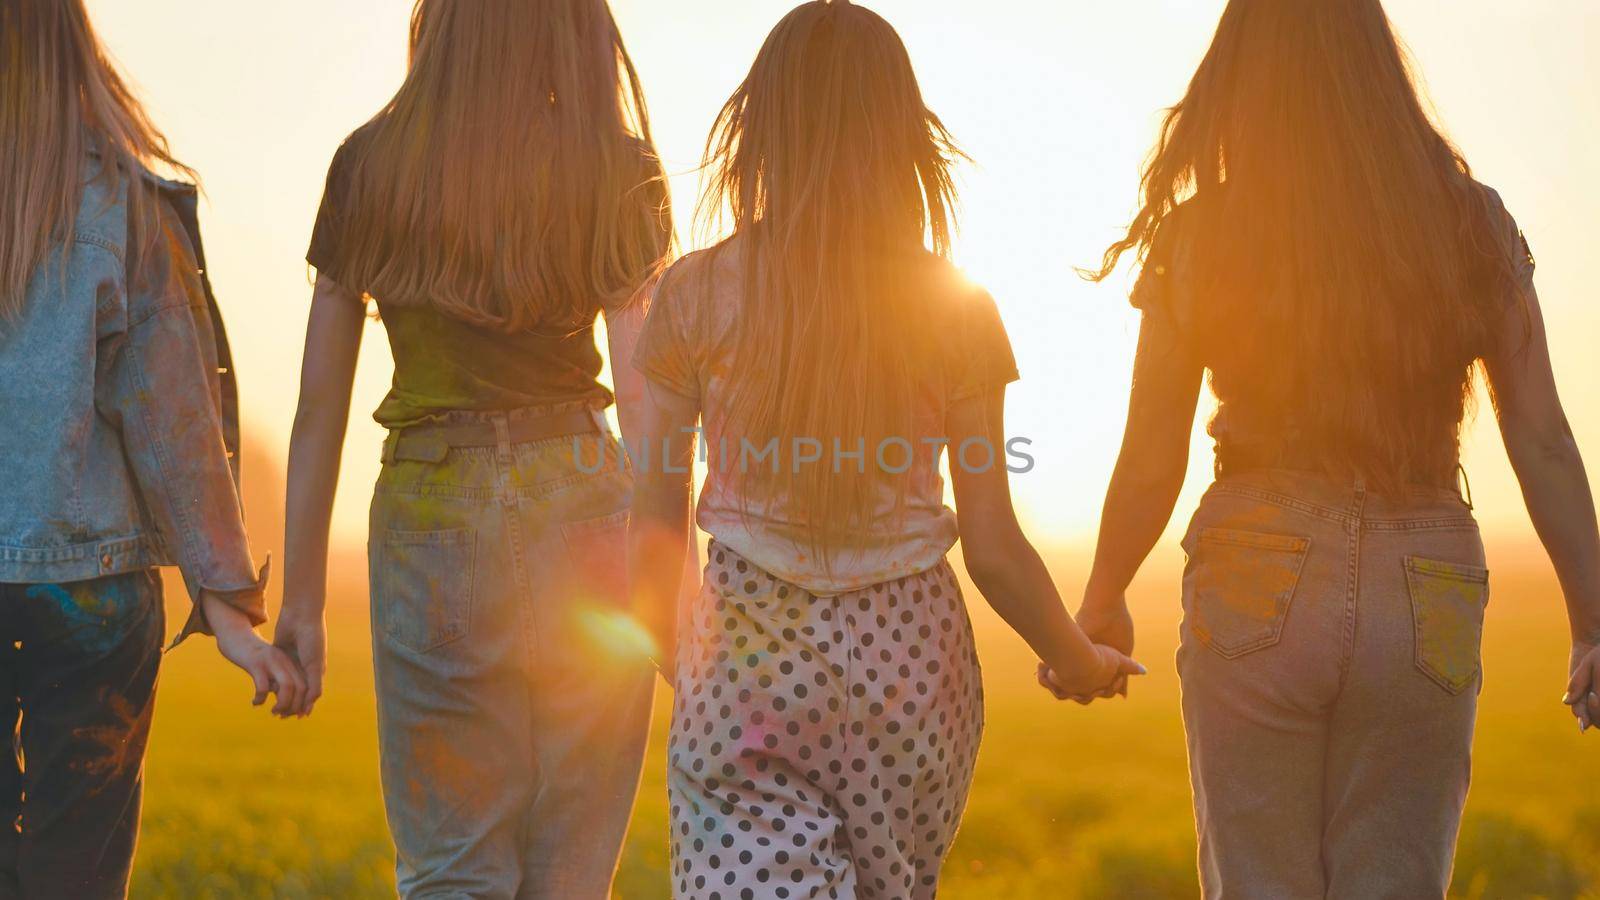 A group of girls walk towards the sun at sunset holding hands. by DovidPro